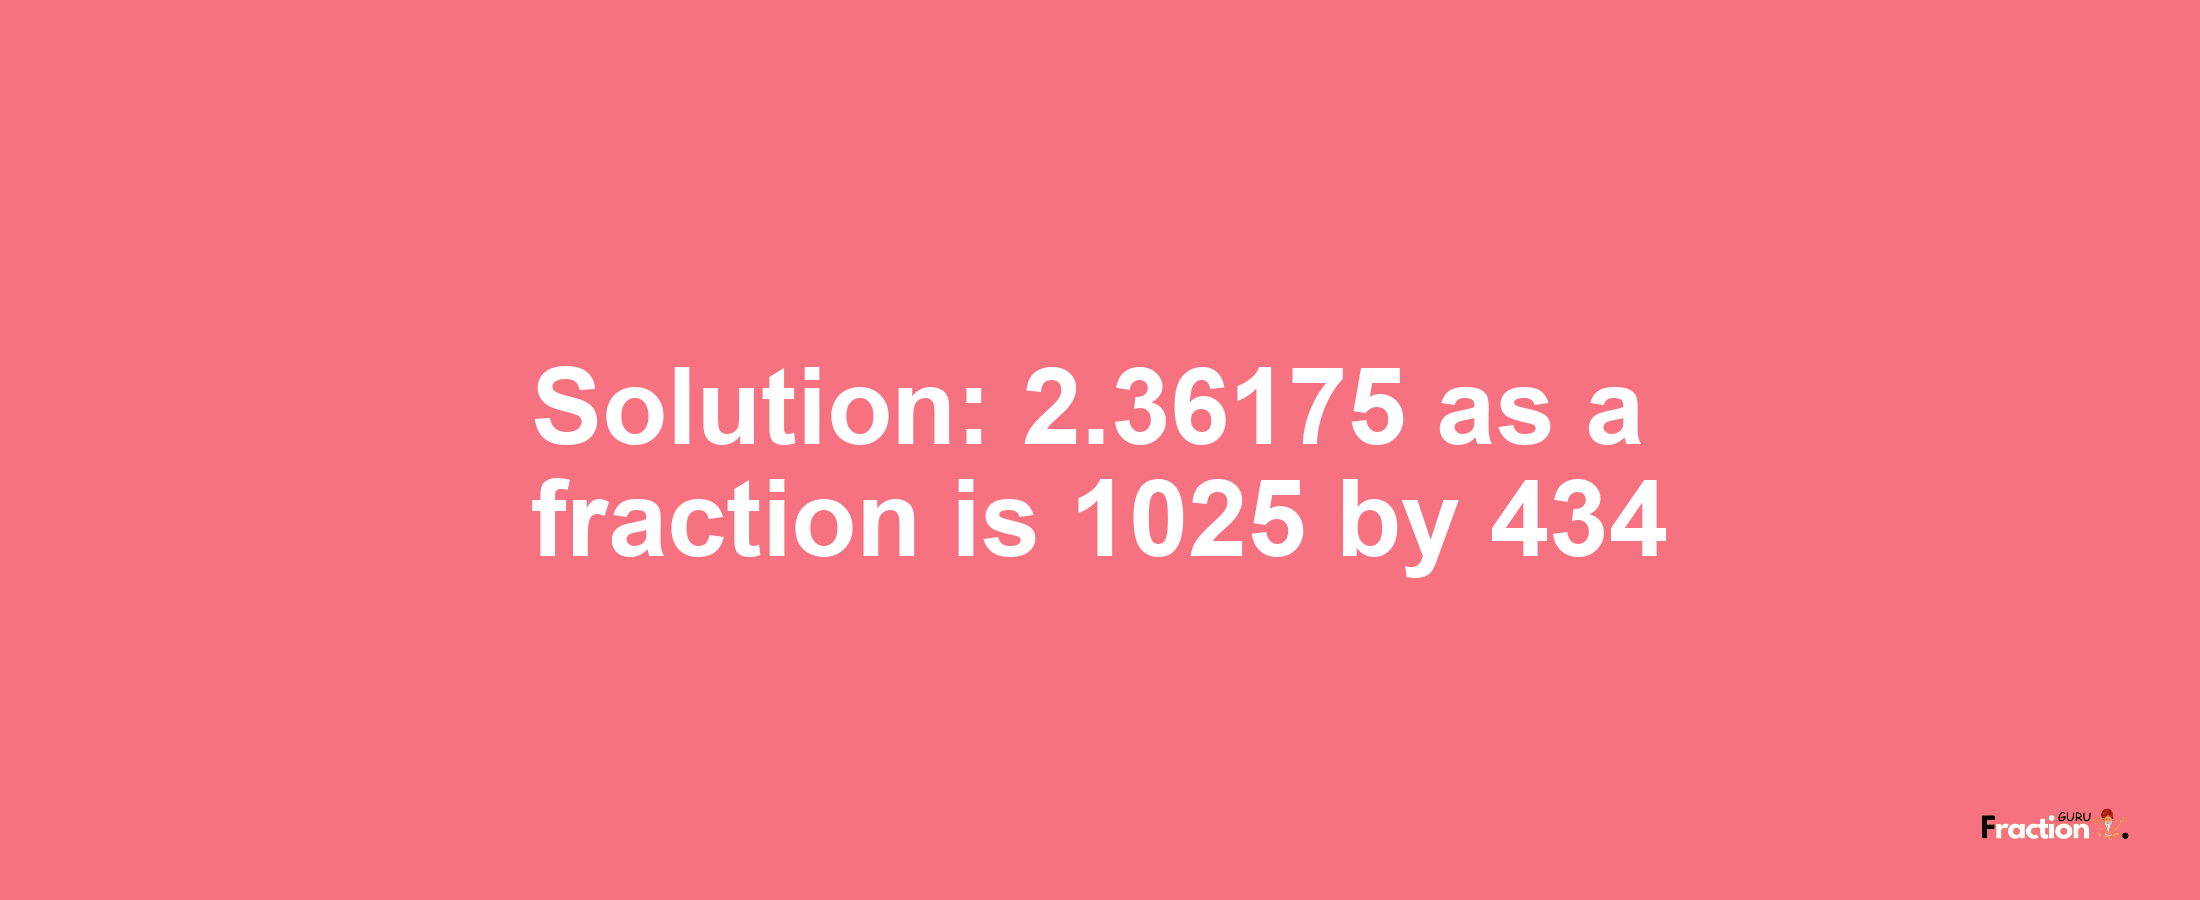 Solution:2.36175 as a fraction is 1025/434